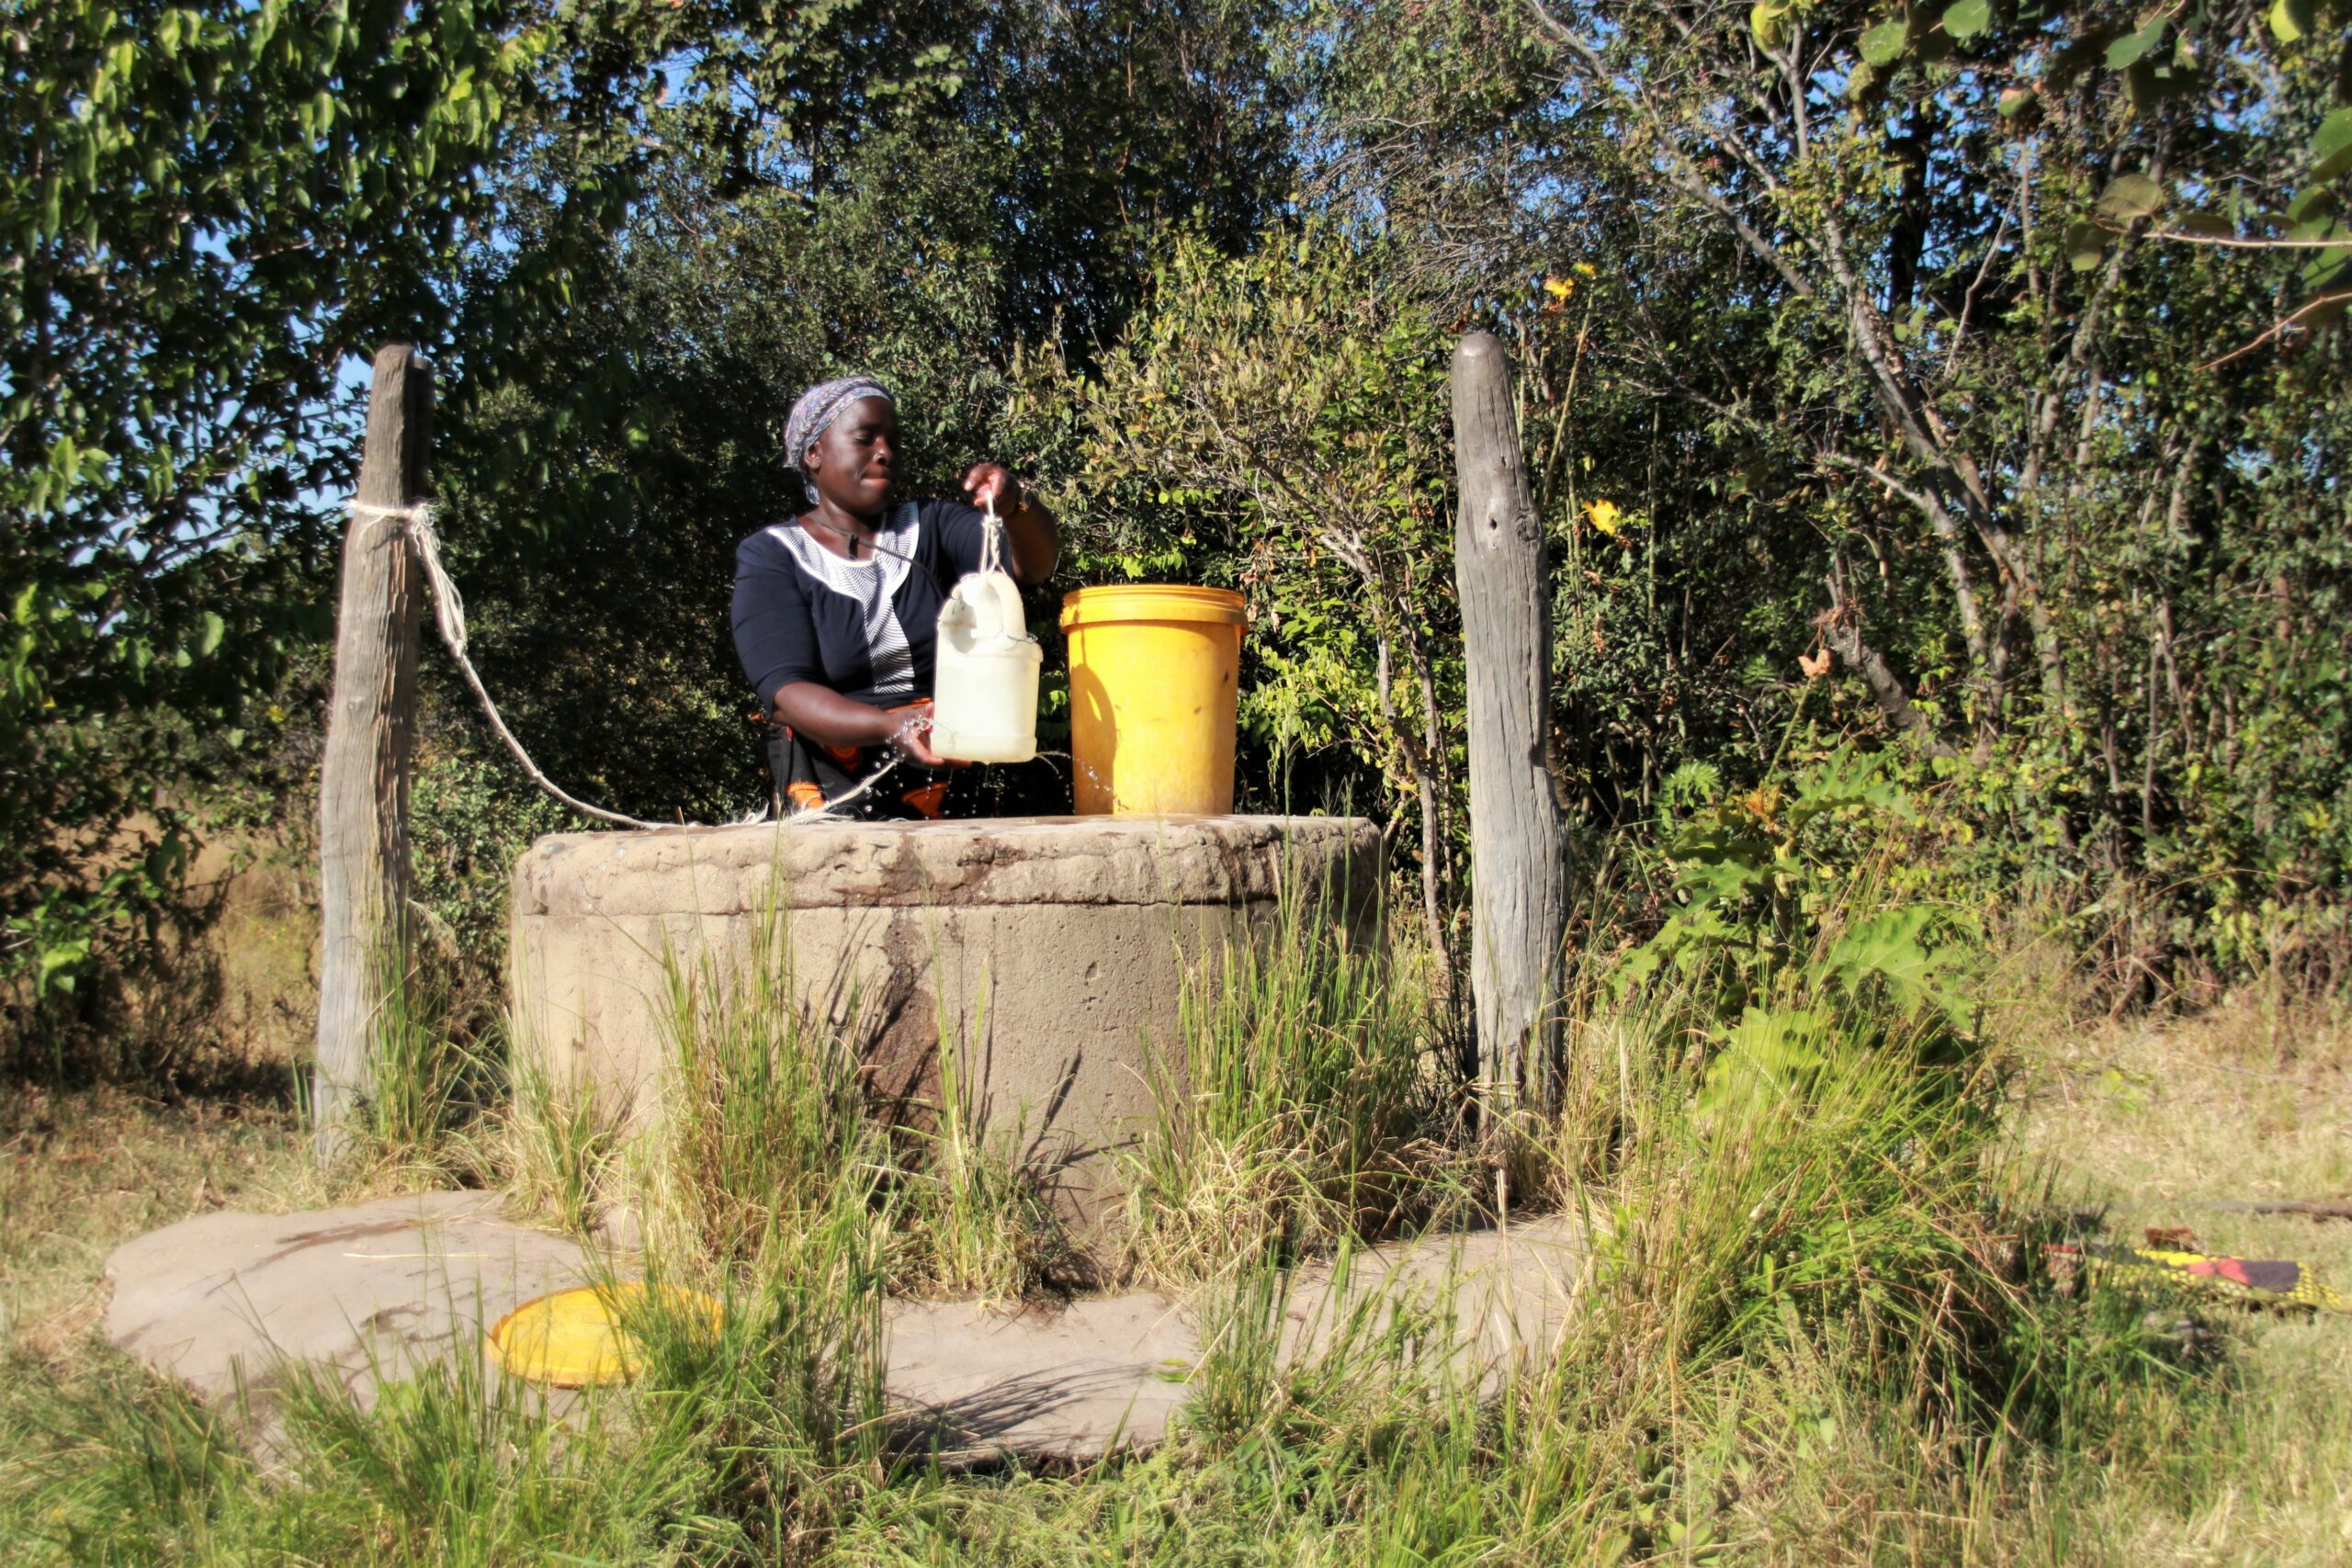 A woman stands outside behind a large stone well. She uses a small white container, attached to a rope, to collect the water and fill a larger yellow bucket beside her.